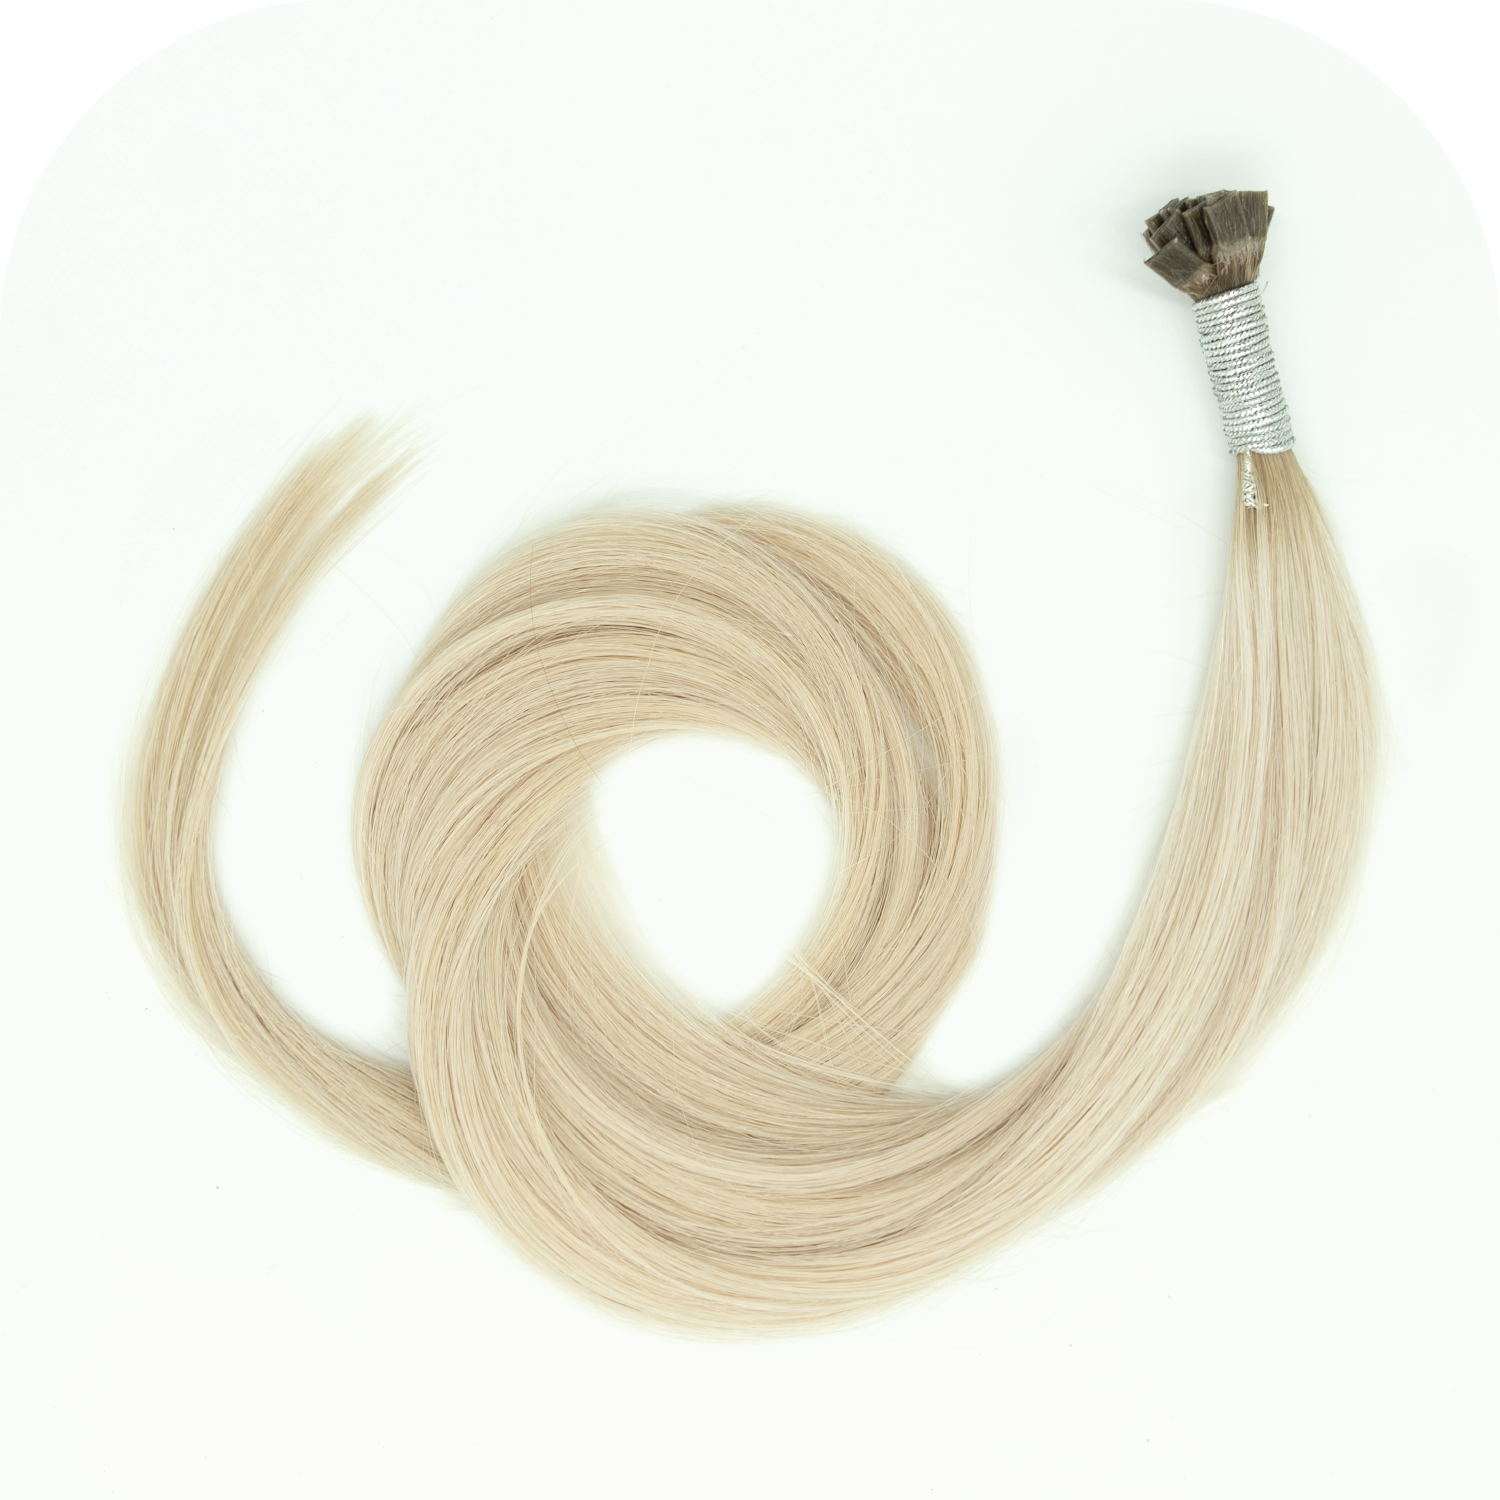 Couture Hair Co. Couture Tip or K Tip Hair Extension in Color Rooted Platinum 